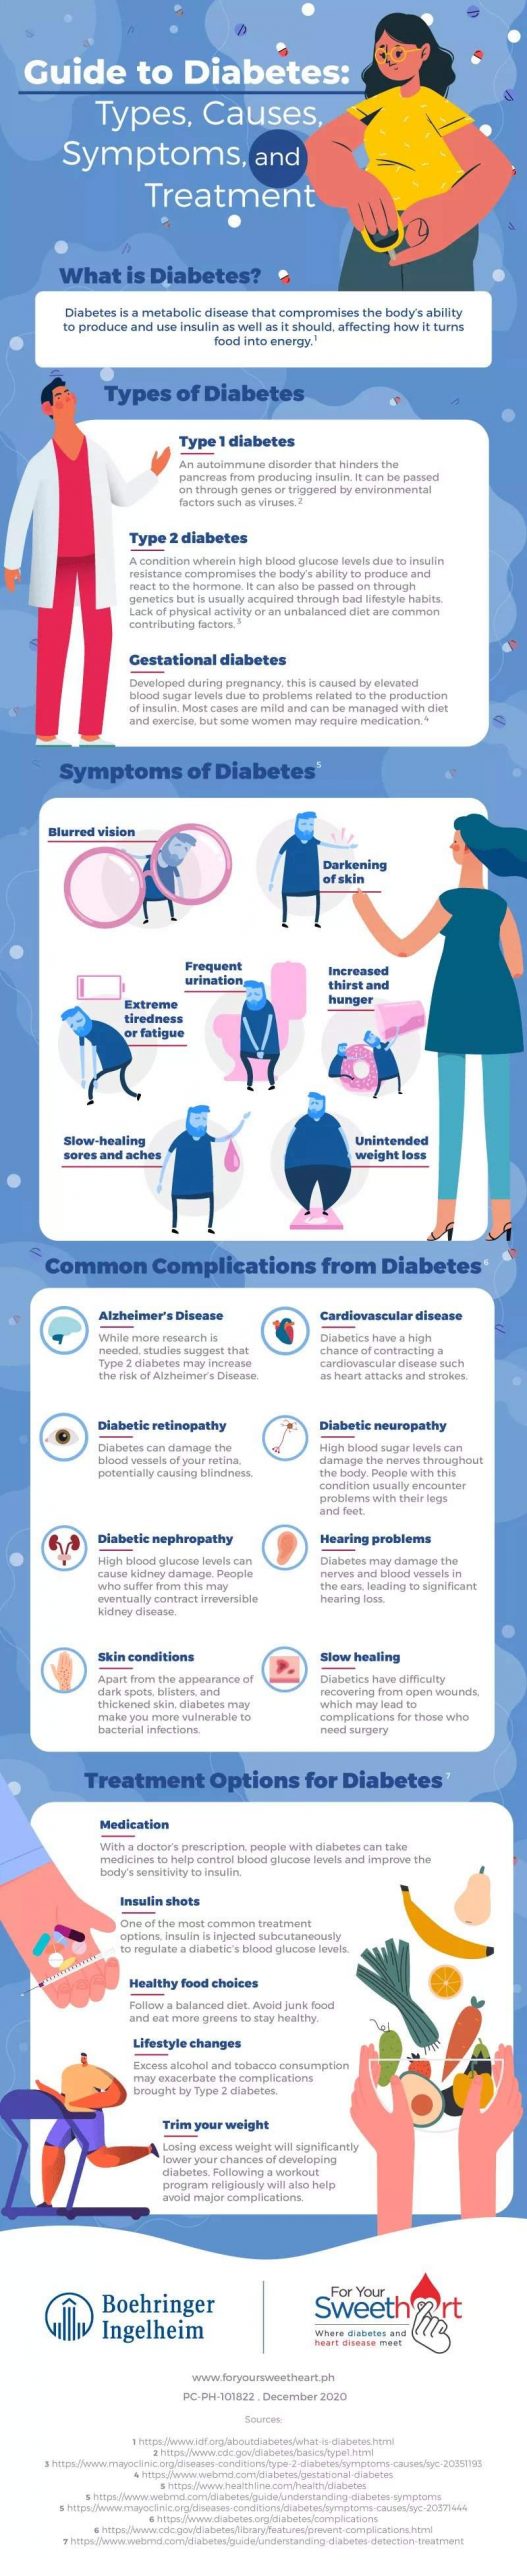 Guide to Diabetes